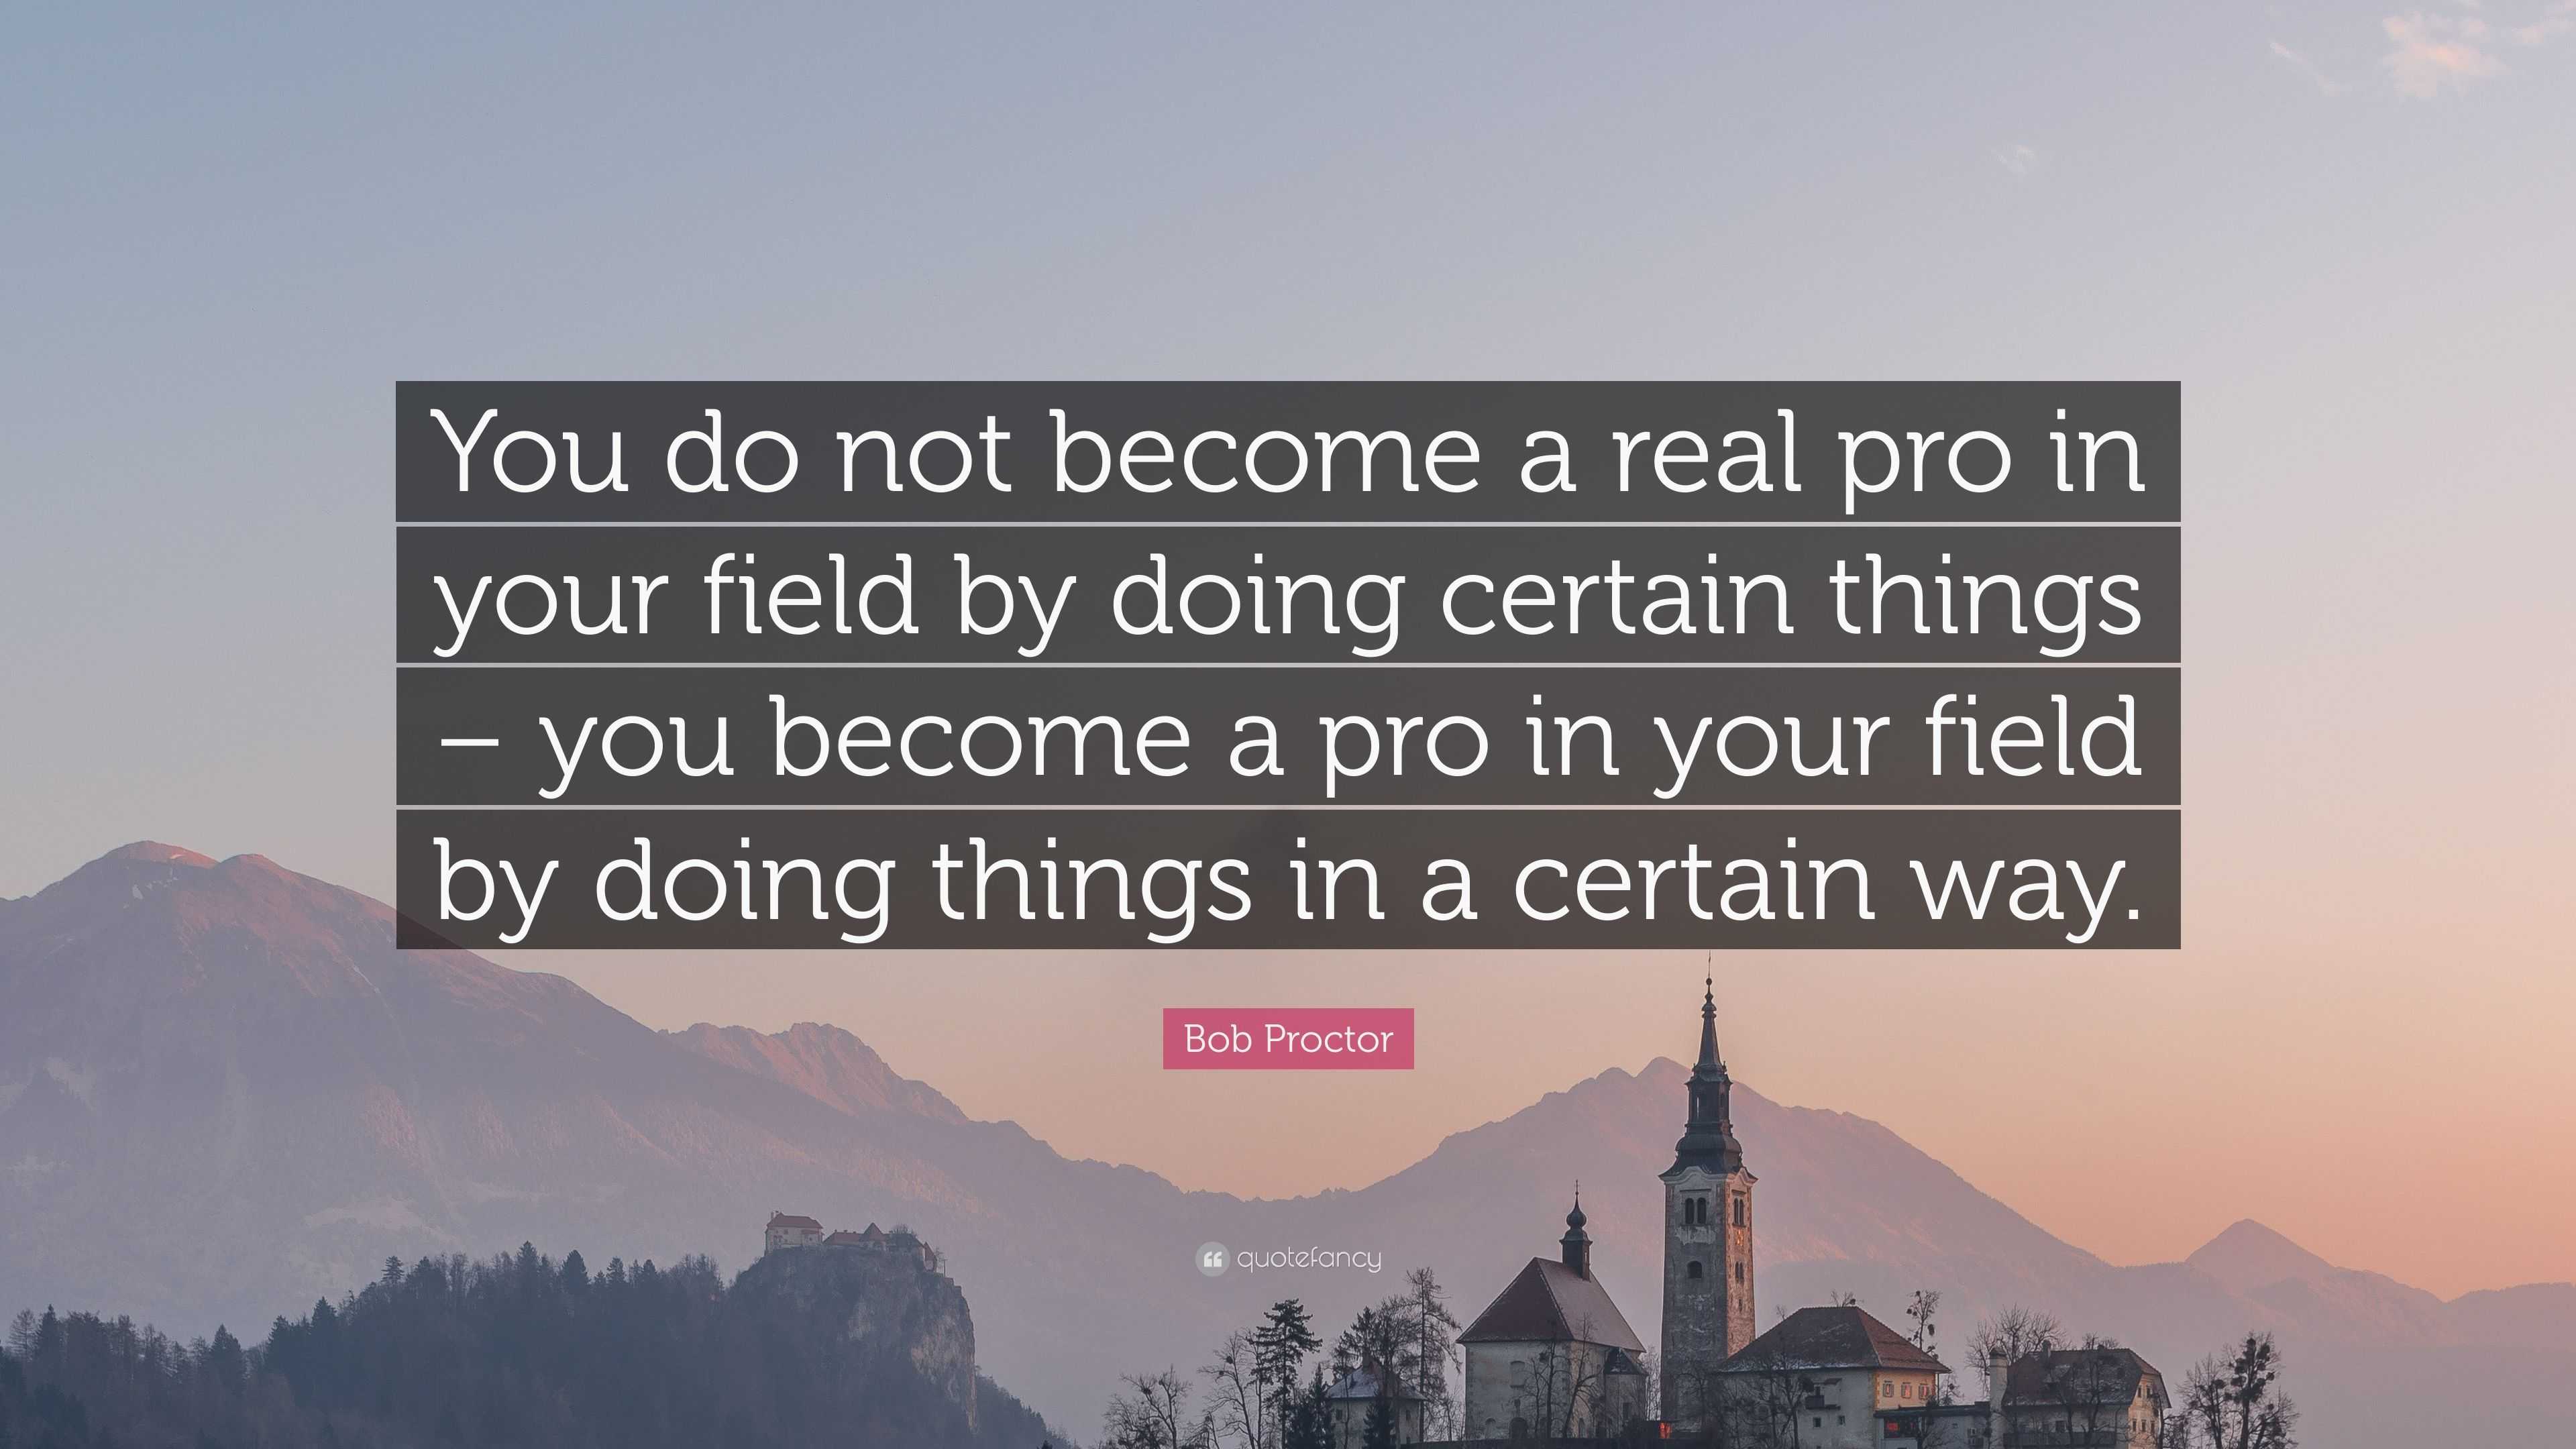 Bob Proctor Quote: “You do not become a real pro in your field by doing  certain things – you become a pro in your field by doing things in a”